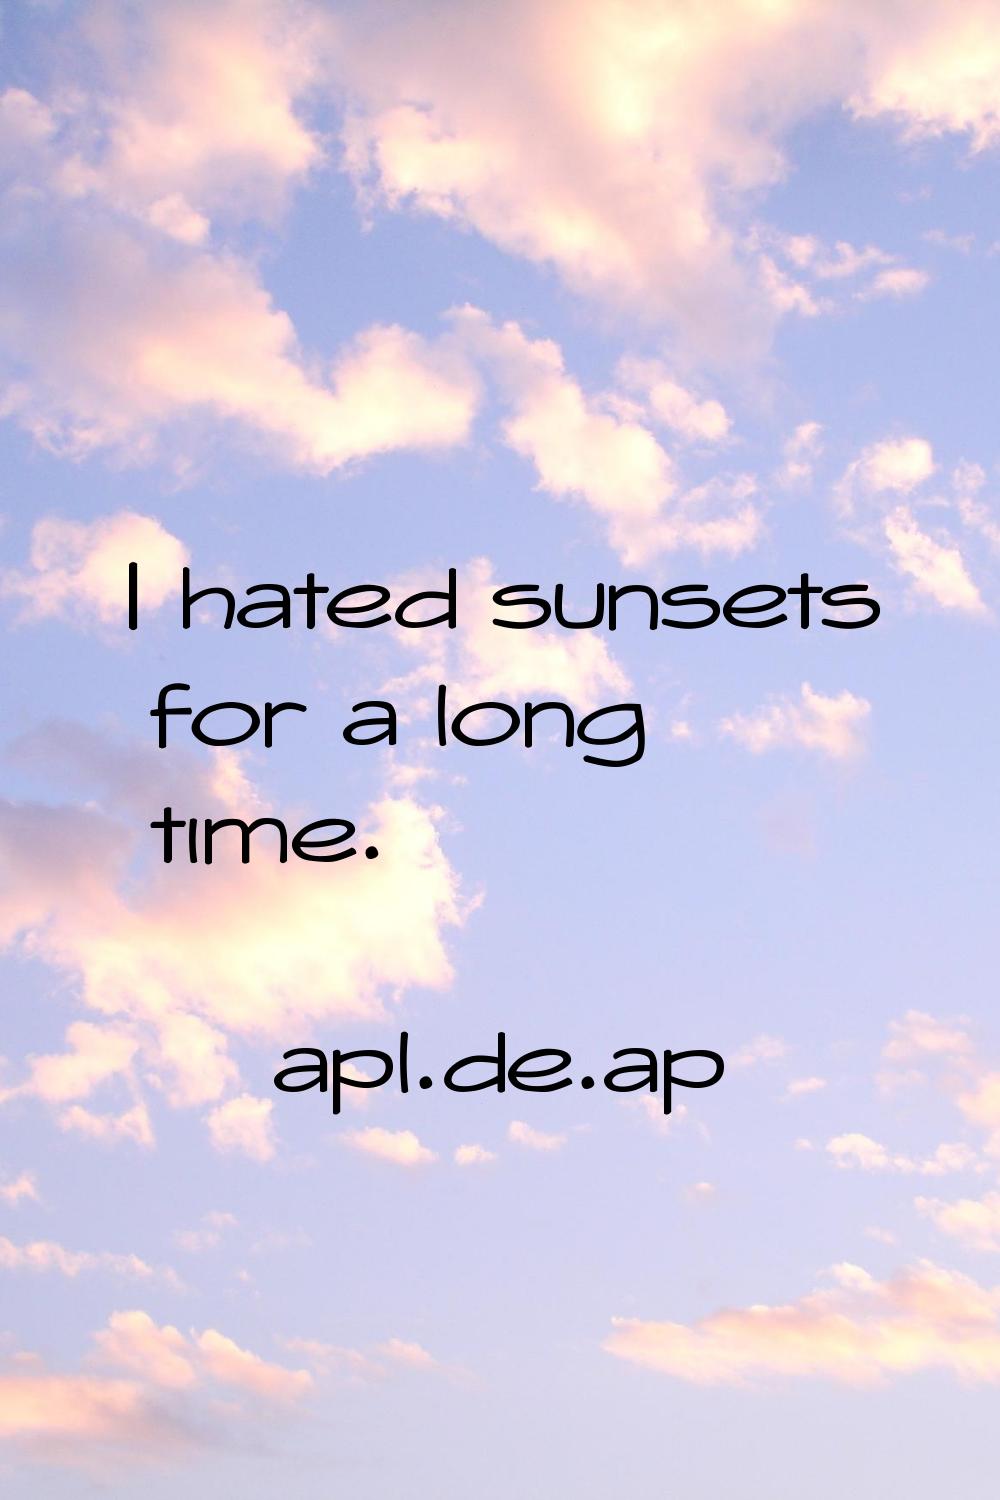 I hated sunsets for a long time.